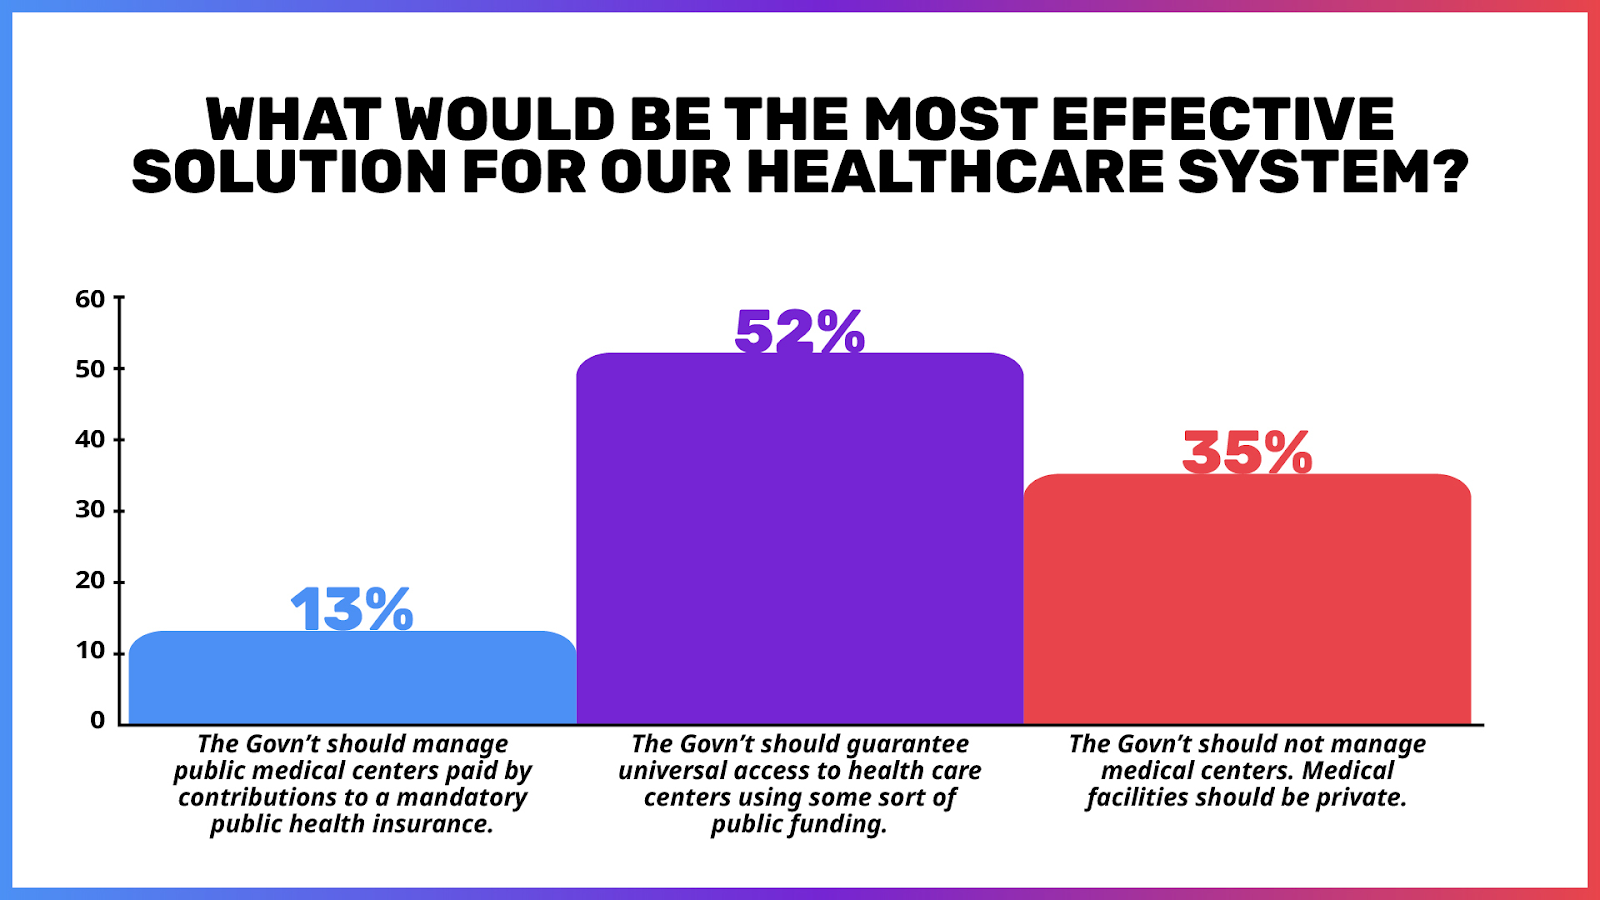 A bar chart titled 'What would be the most effective solution for our healthcare system?' It displays three policy options: 'The Gov't should manage public medical centers paid by contributions to a mandatory public health insurance' at 13% in blue, 'The Gov't should guarantee universal access to health care centers using some sort of public funding' at 52% in purple, and 'The Gov't should not manage medical centers. Medical facilities should be private' at 35% in red.